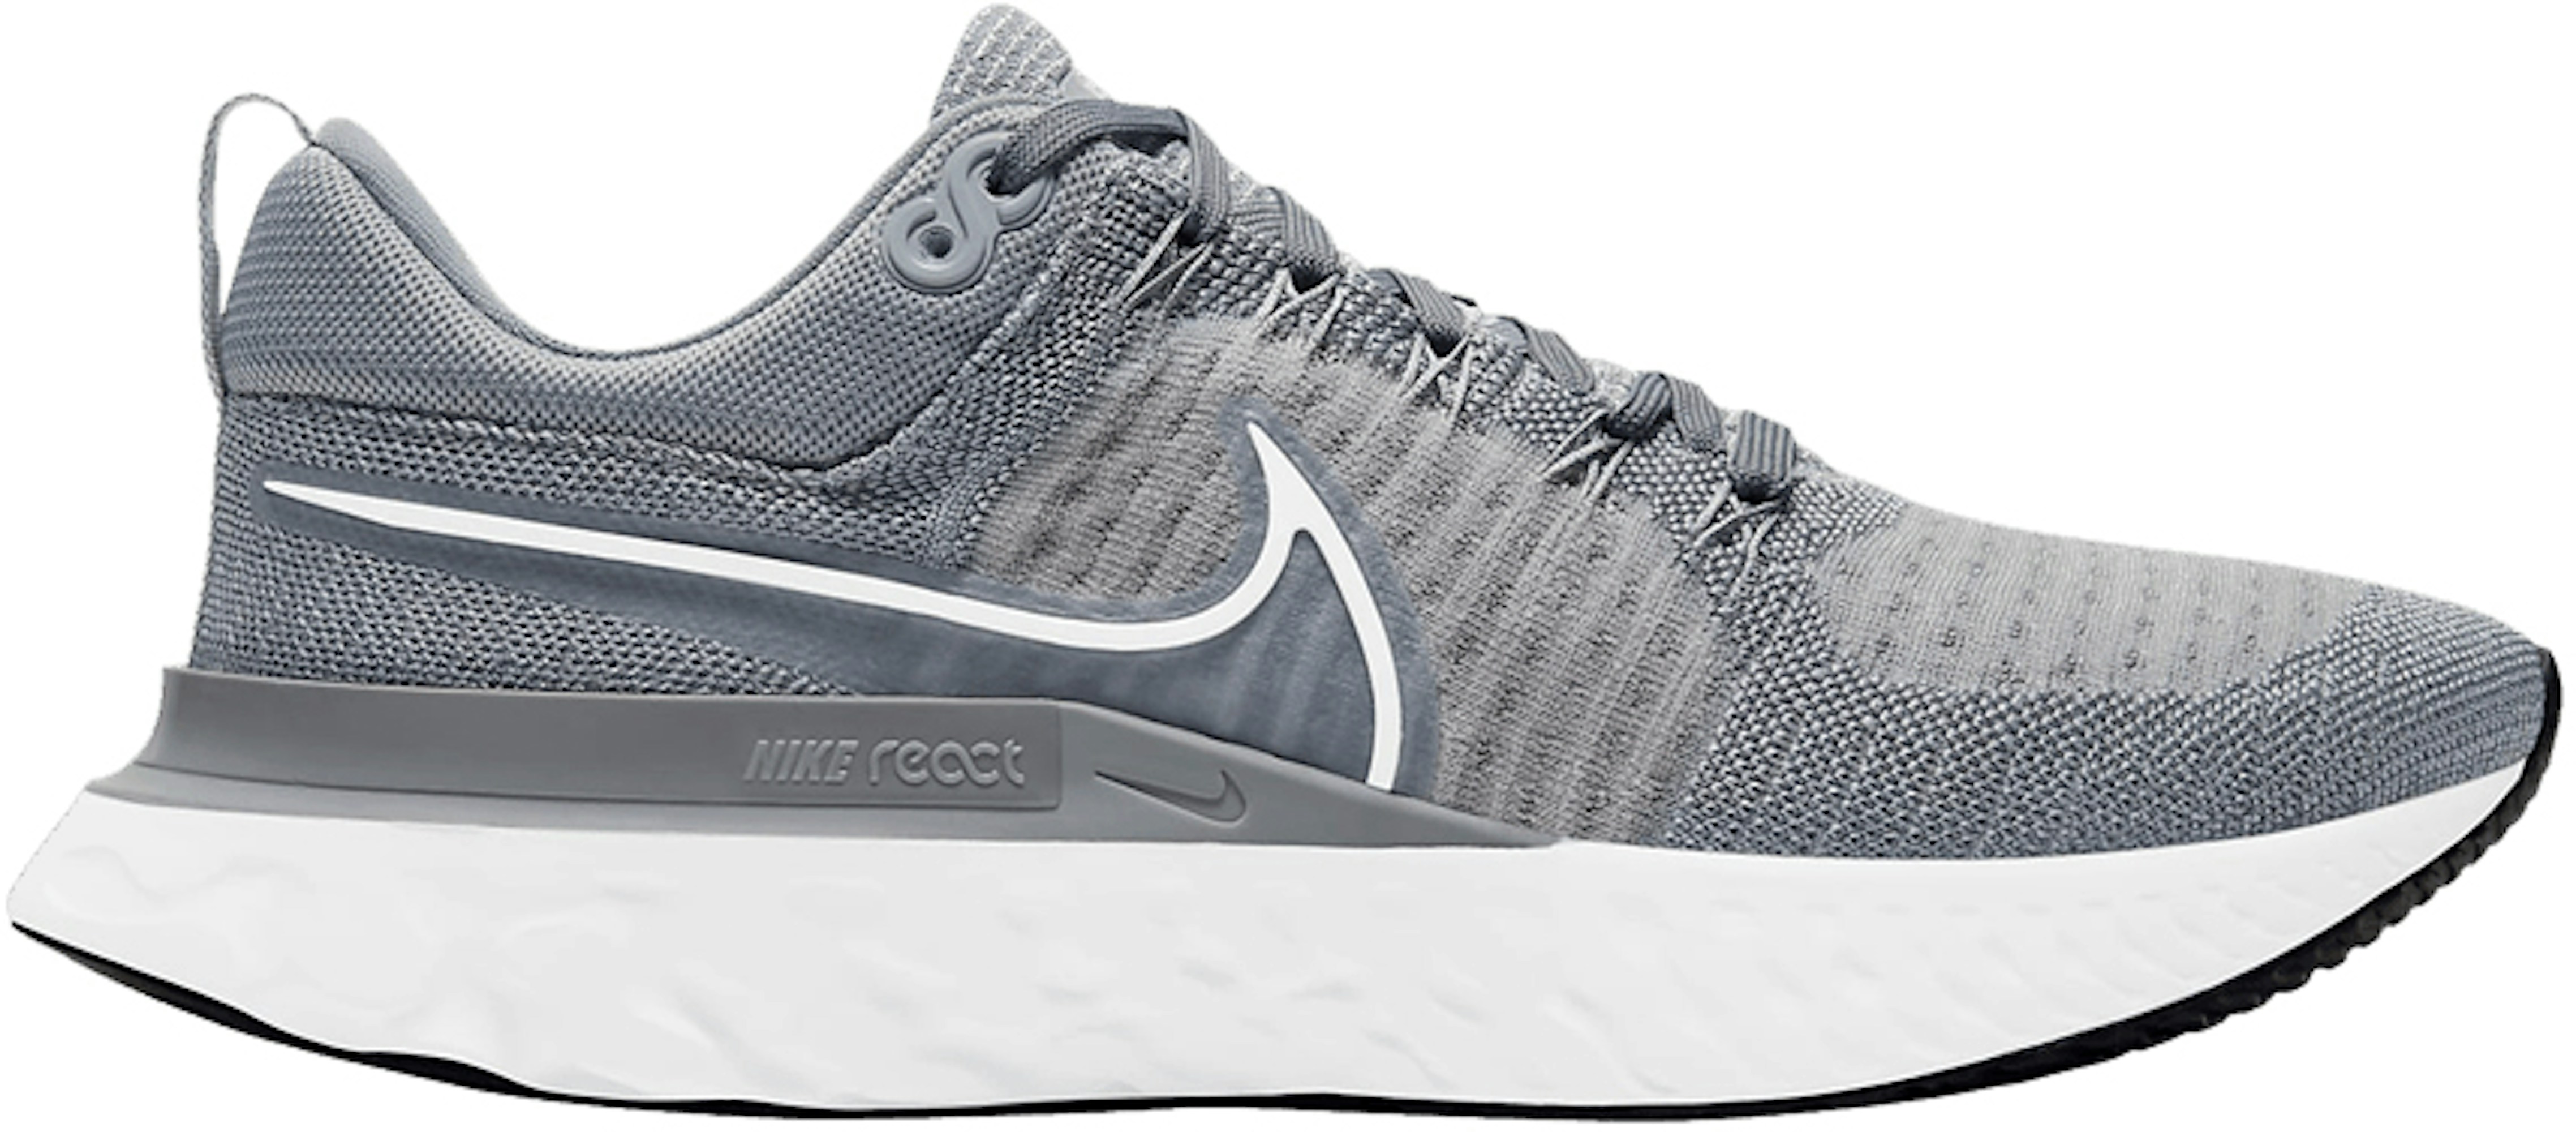 Nike React Infinity Run Flyknit 2 Particle Grey - CT2357-001